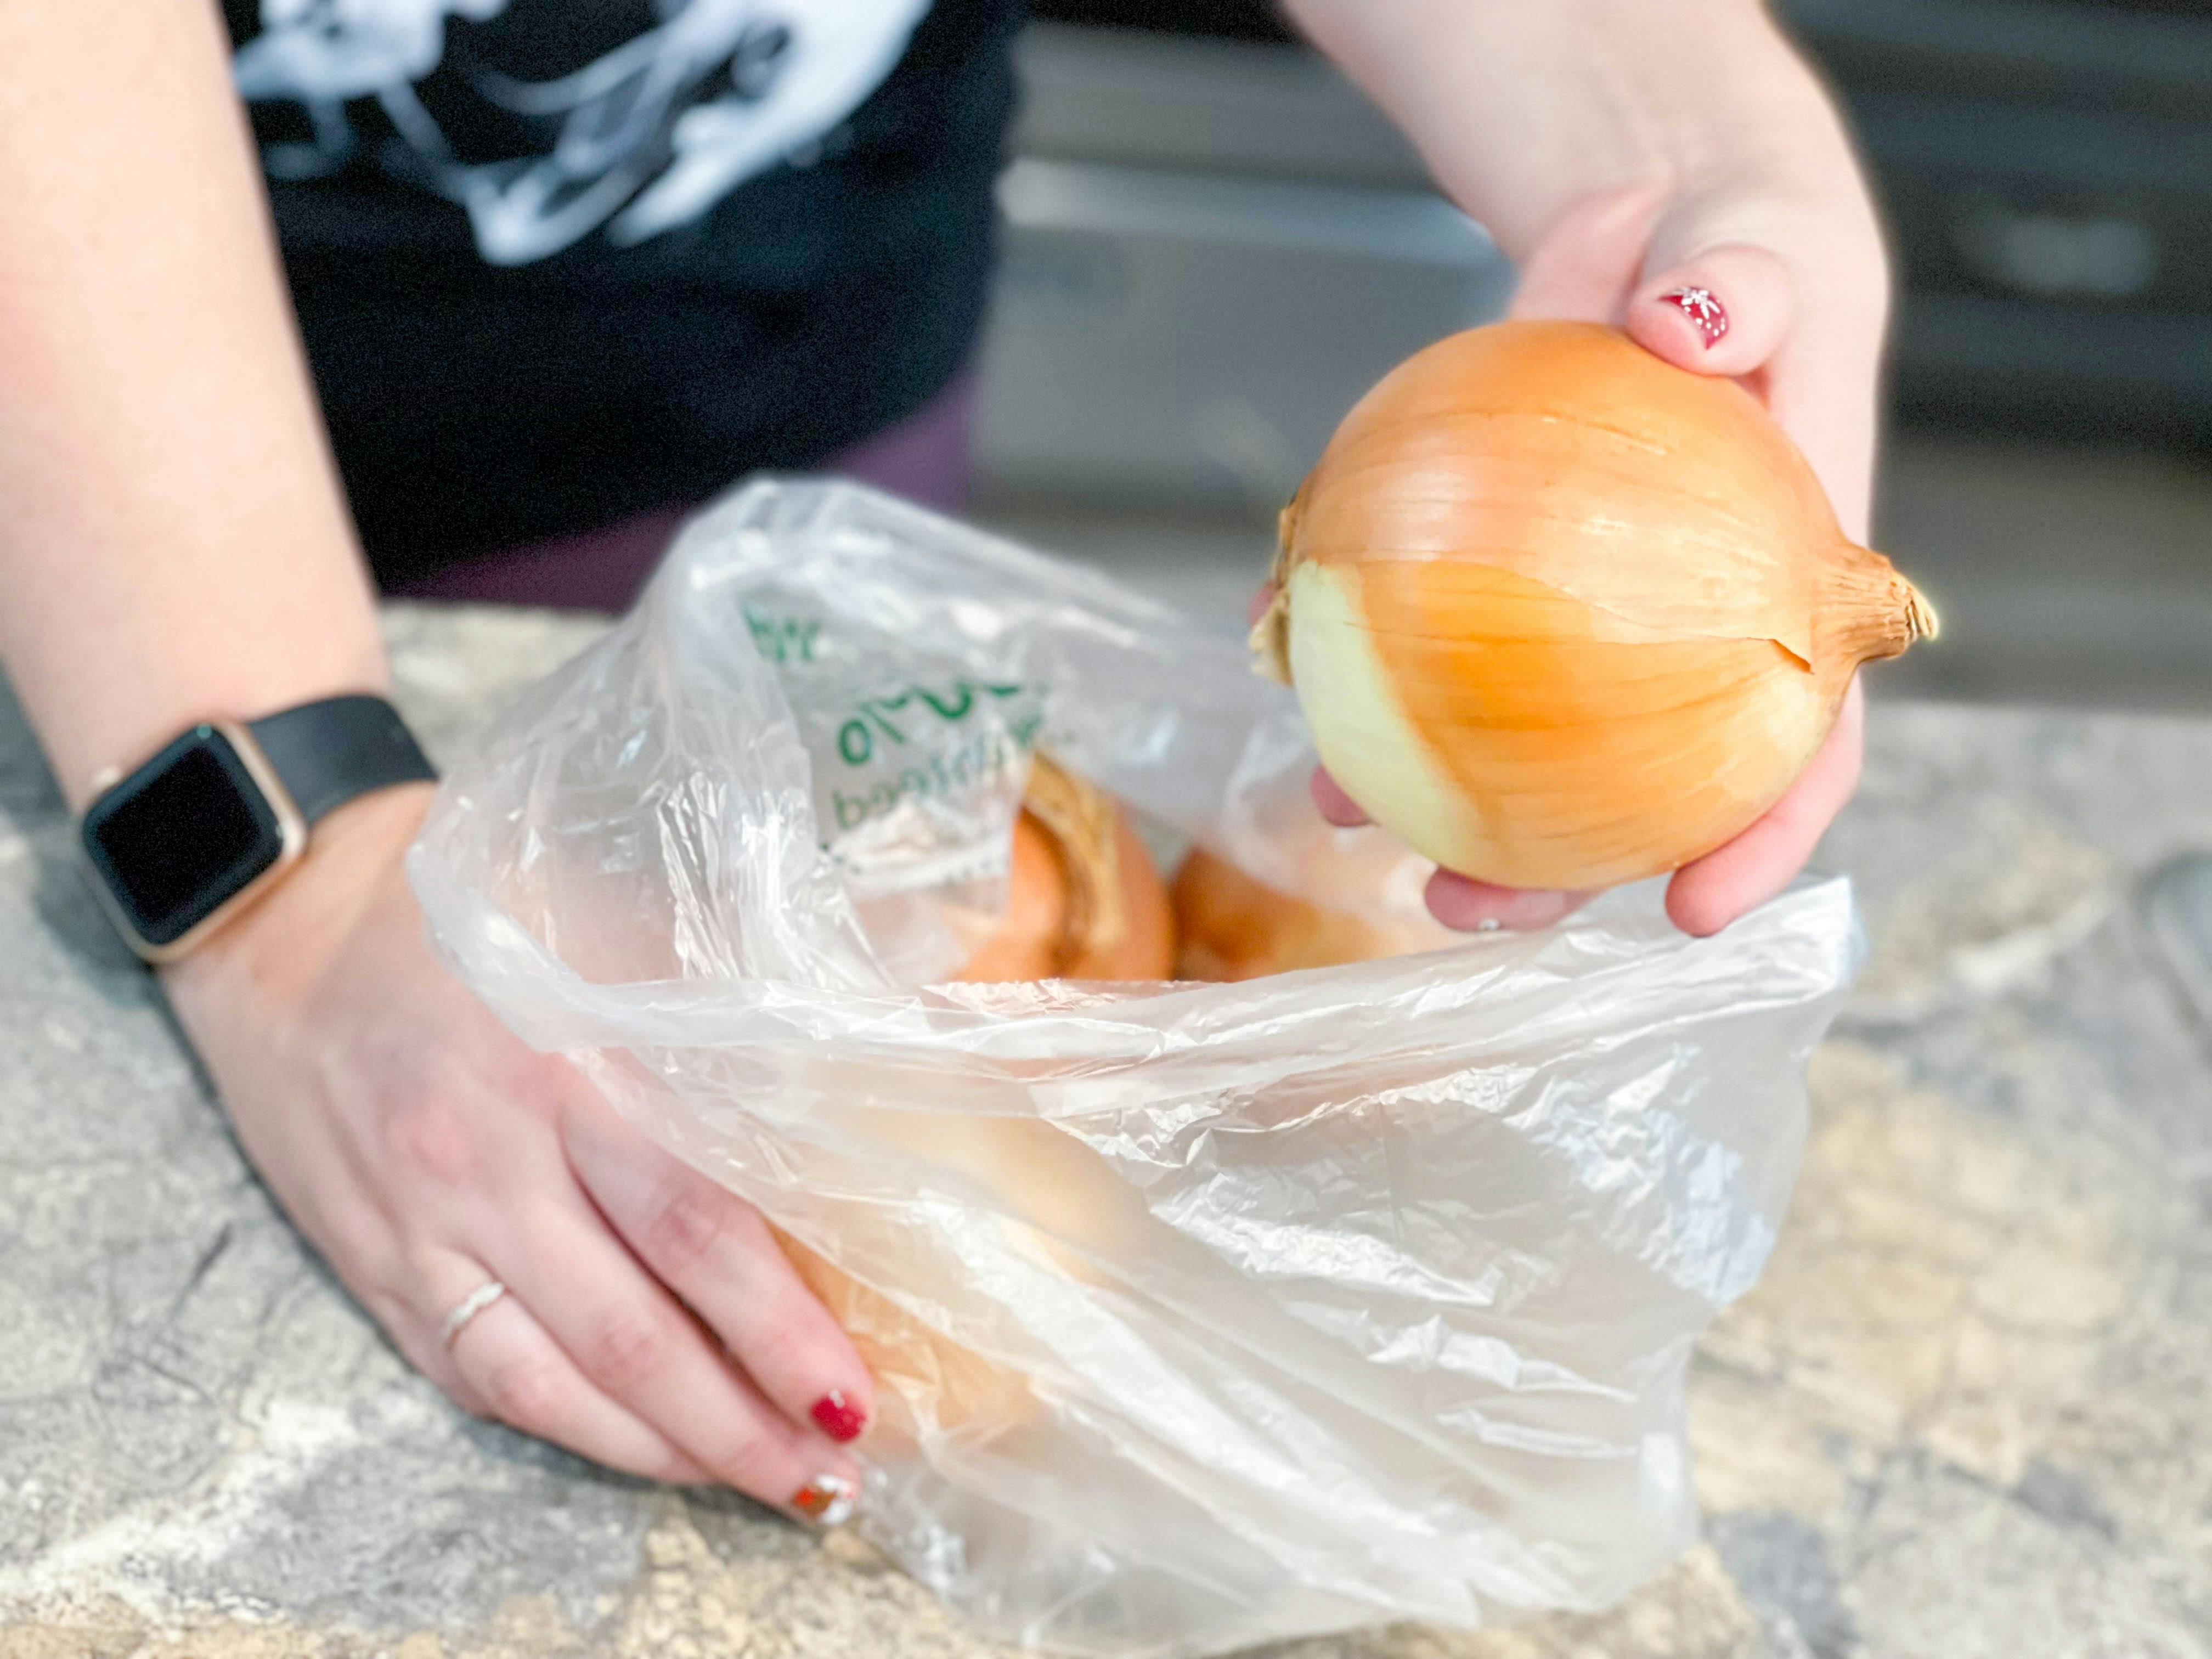 onions in a plastic bag